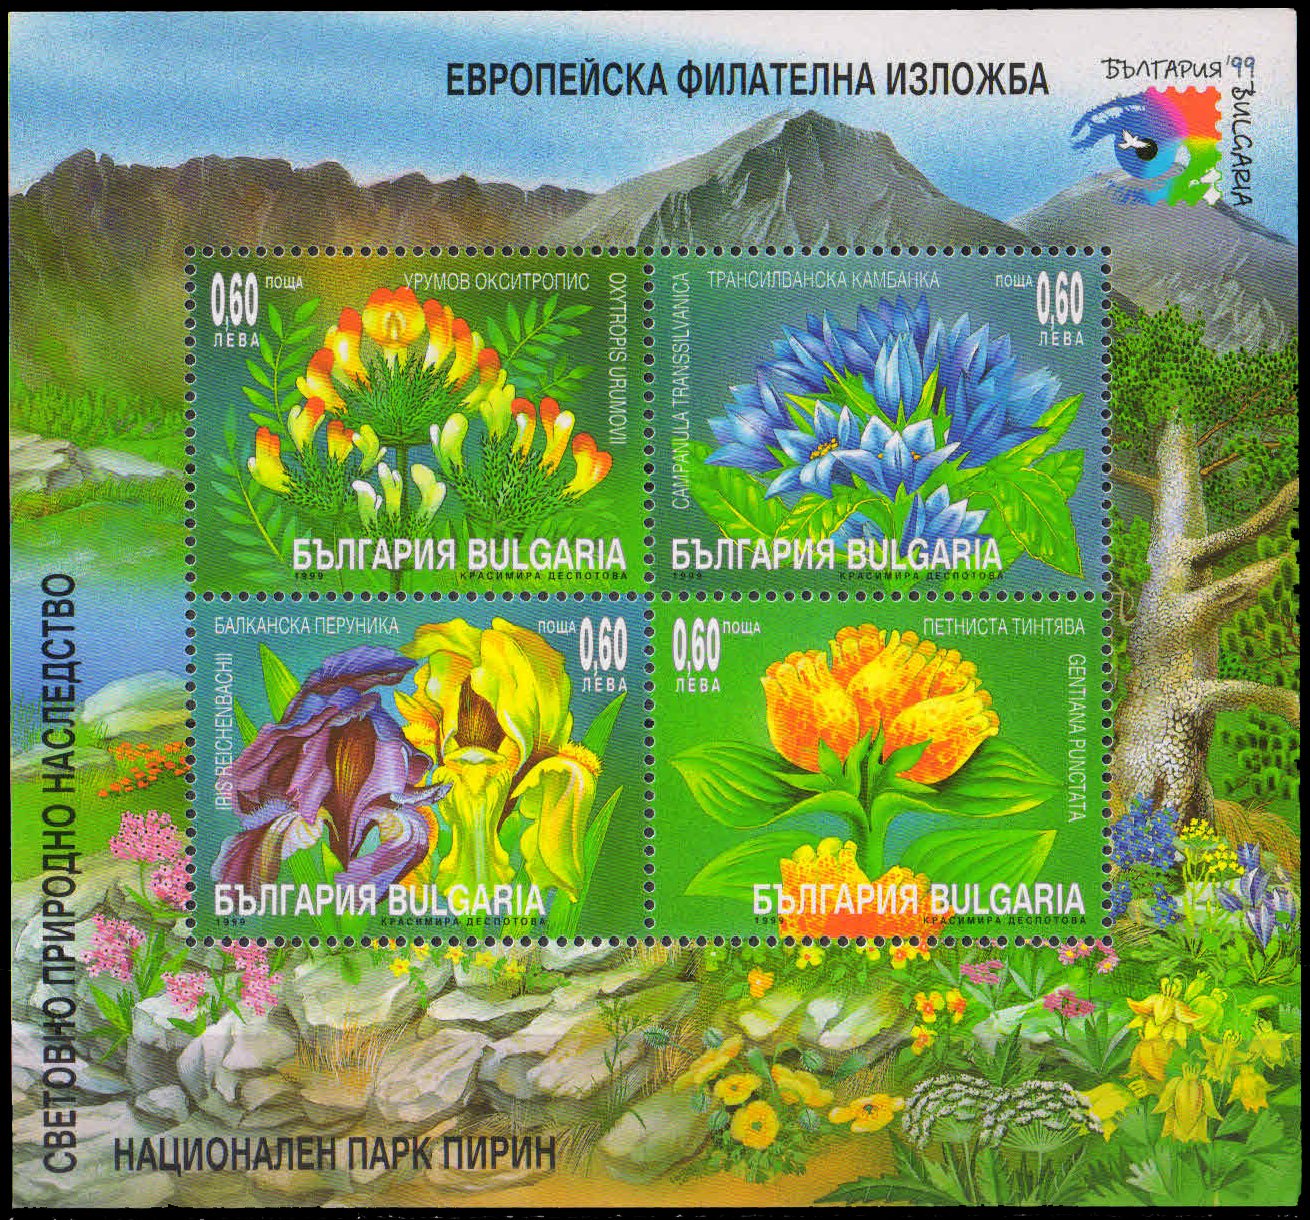 BULGARIA 1999-Flowers in Pirin National Park-European Stamp Exhibition-Sheet of 4, MS-MNH, S.G. MS 4265, Cat £ 13.50